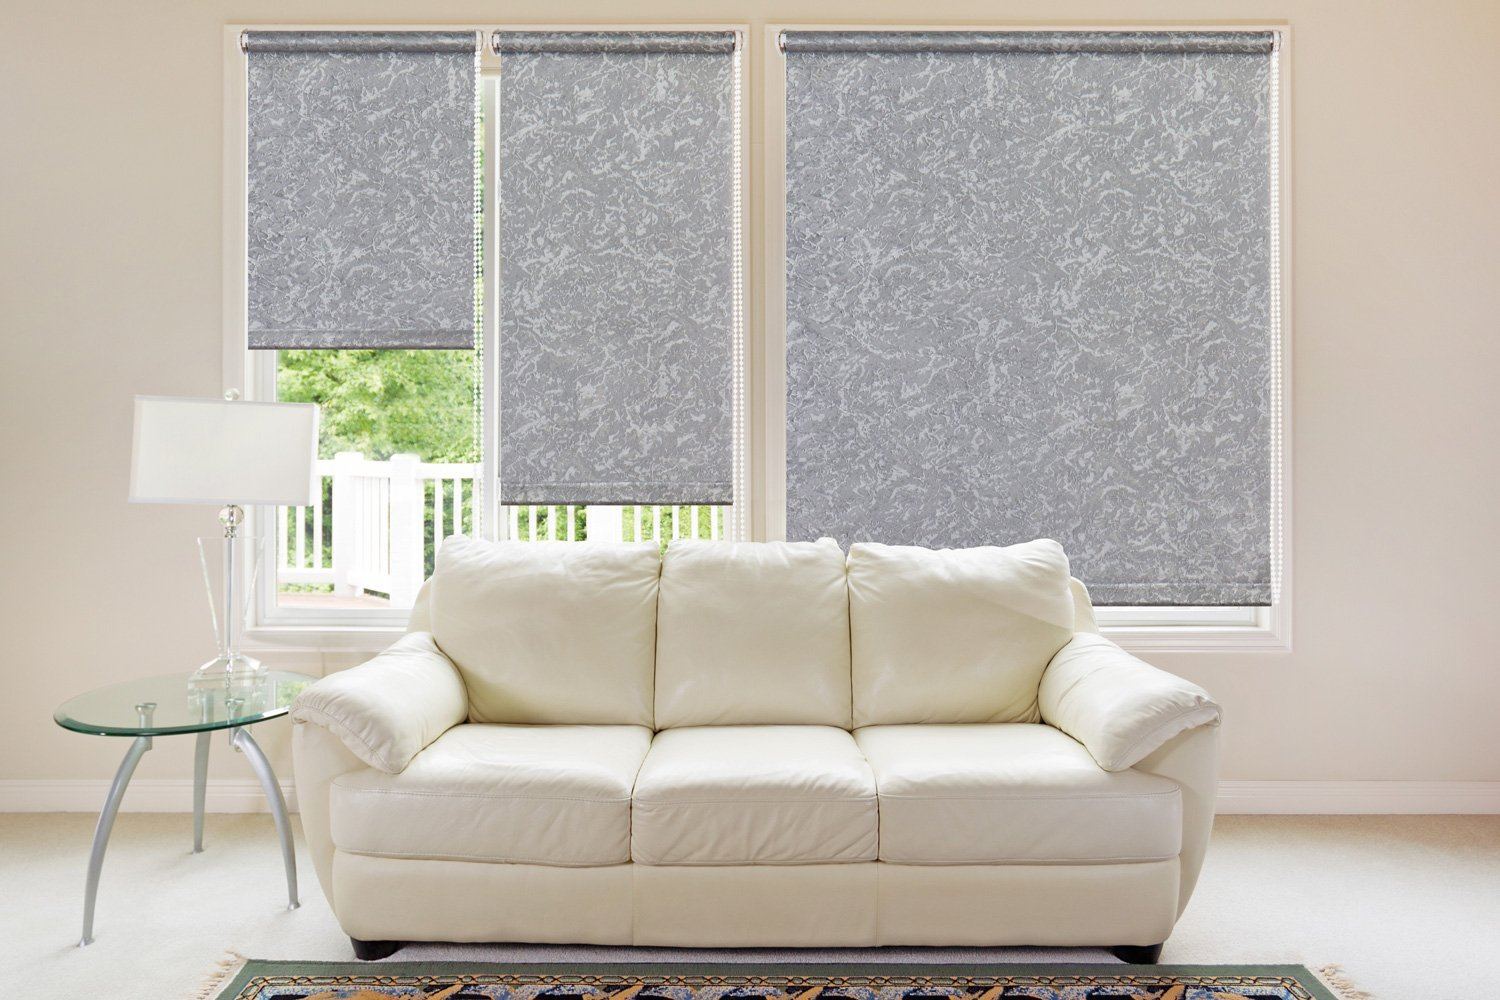 Roller Blinds: Practical and Good Looking Window Treatment. Nice gray textured curtains in modern living interior